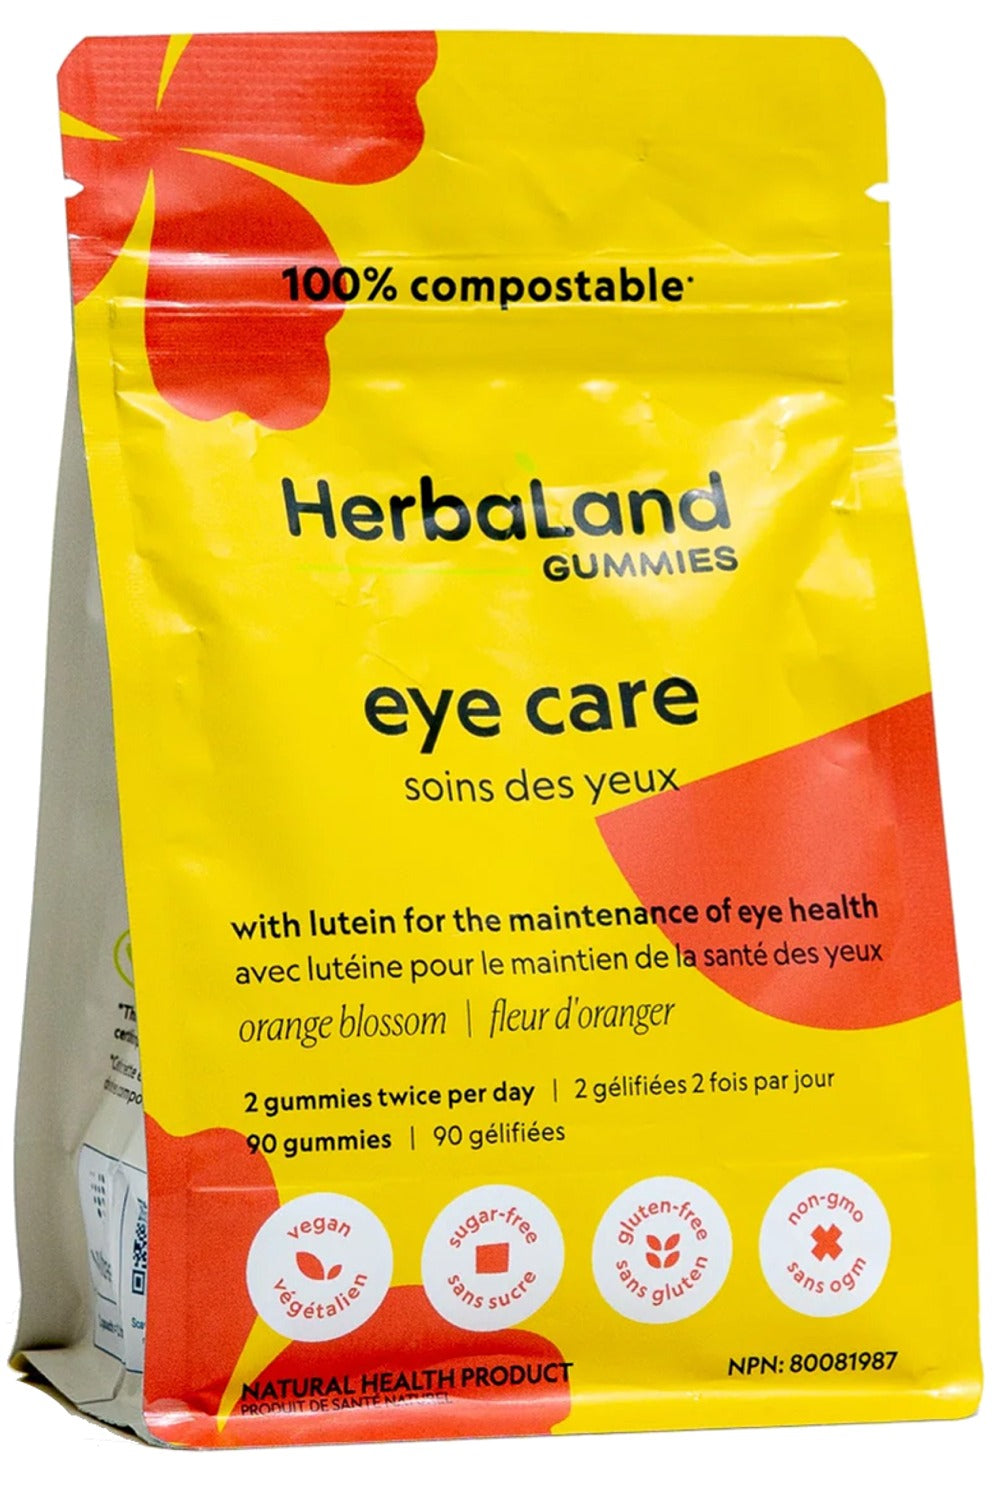 HERBALAND Eye Care for Adults (Strawberry - 90 gummies)